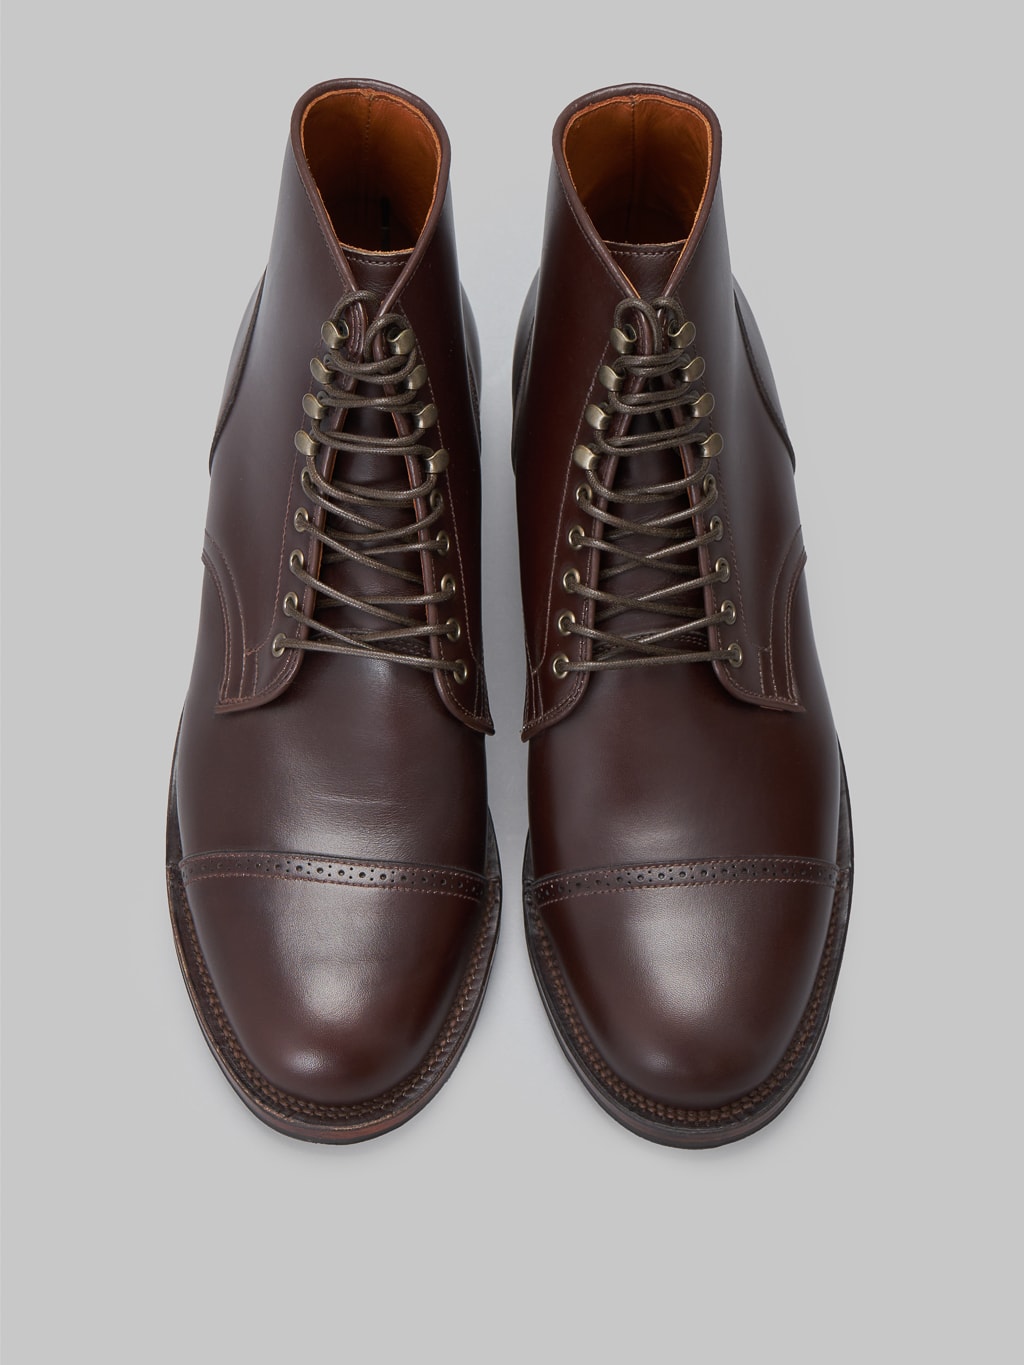 Viberg Service Boot 2030 Annonay Vocalau Warm Brown French Calf